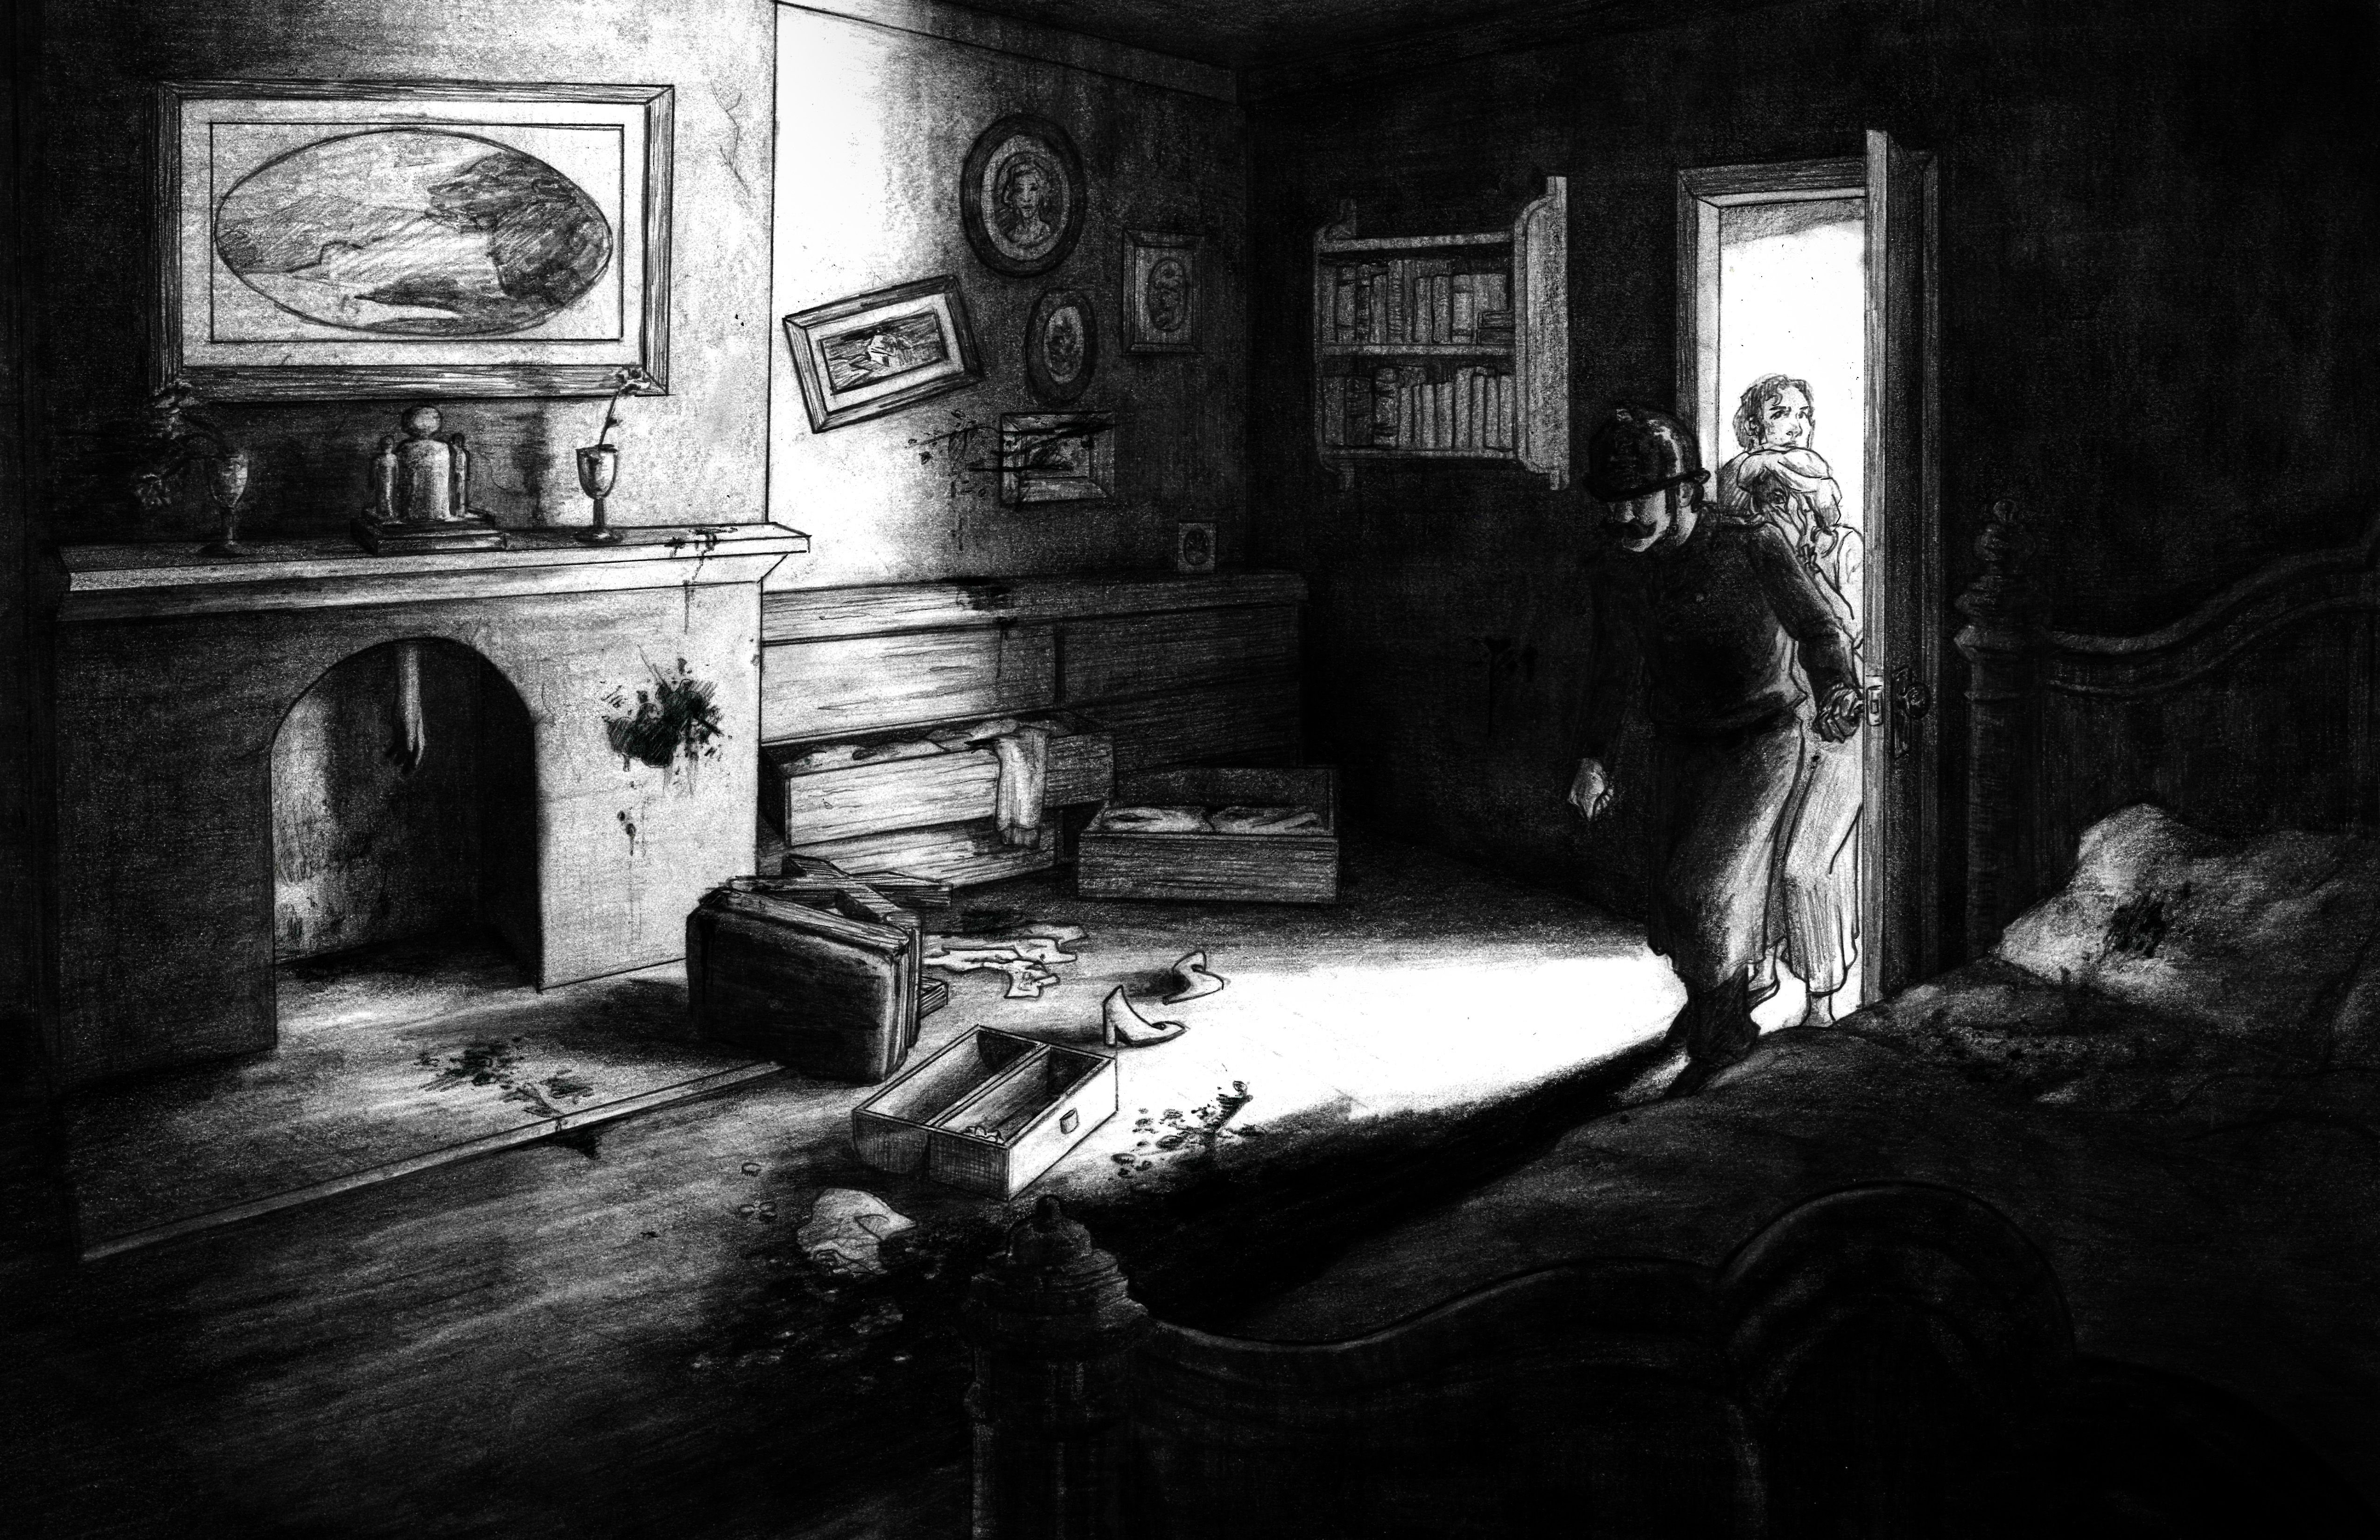 A graphite illustration of a policeman breaking into a dark room in disarray.